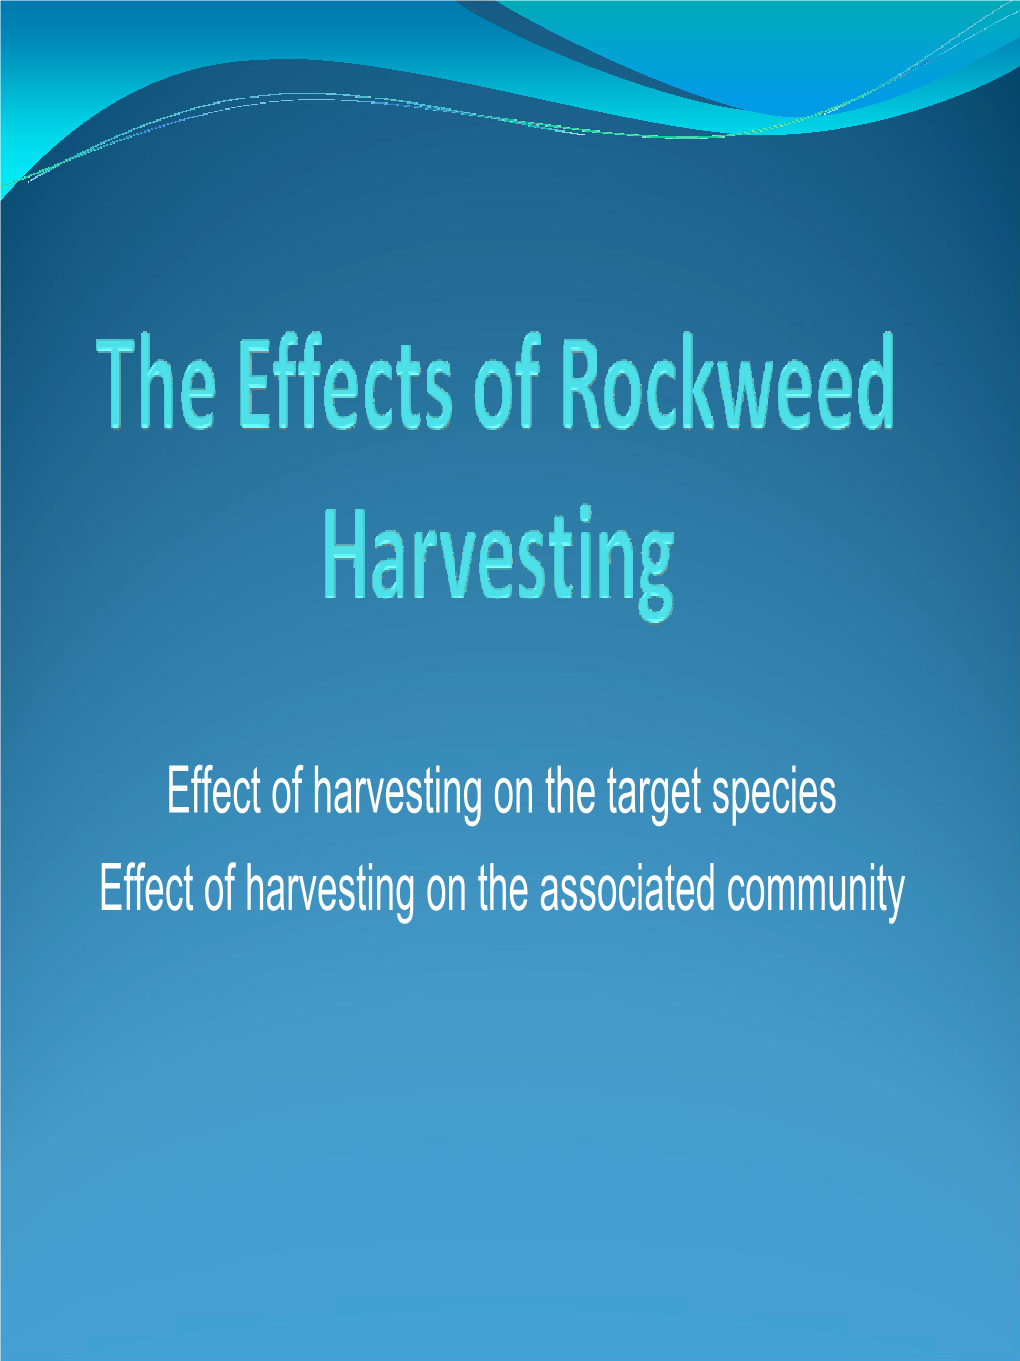 The Effects of Rockweed Harvesting